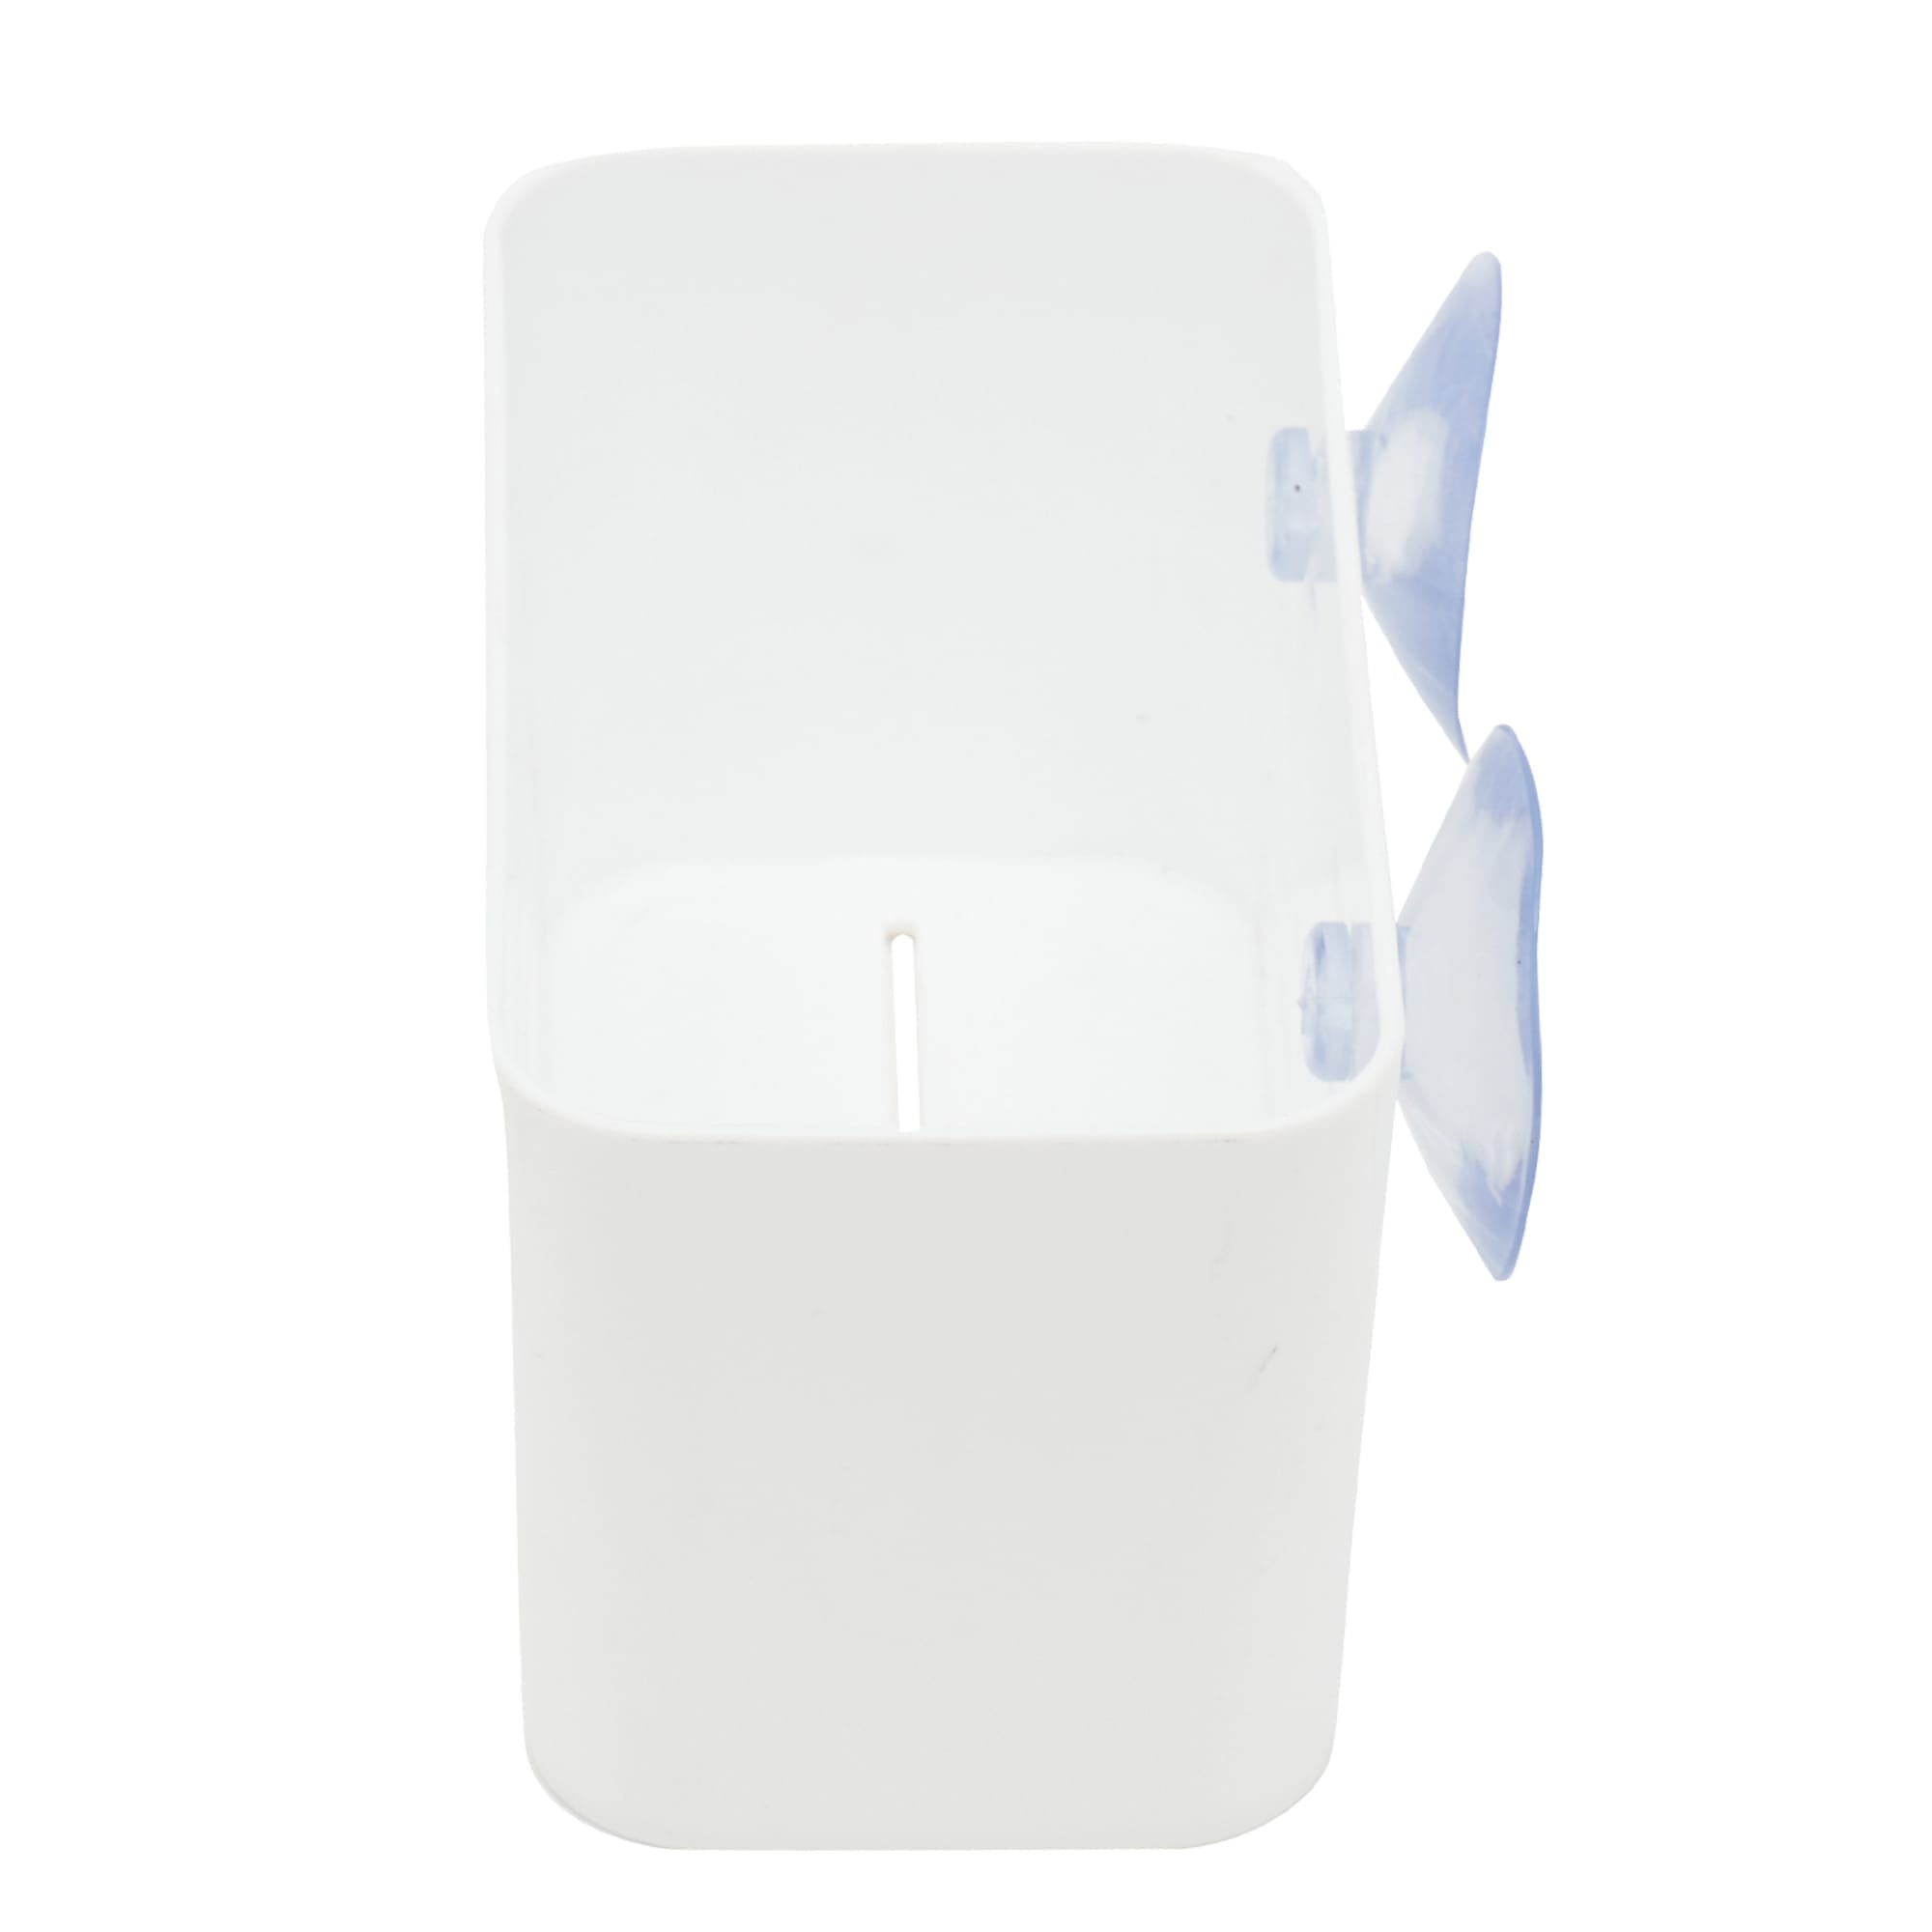 Home Basics Serenity Wide Bath Caddy with Suction, White $2.00 EACH, CASE PACK OF 24